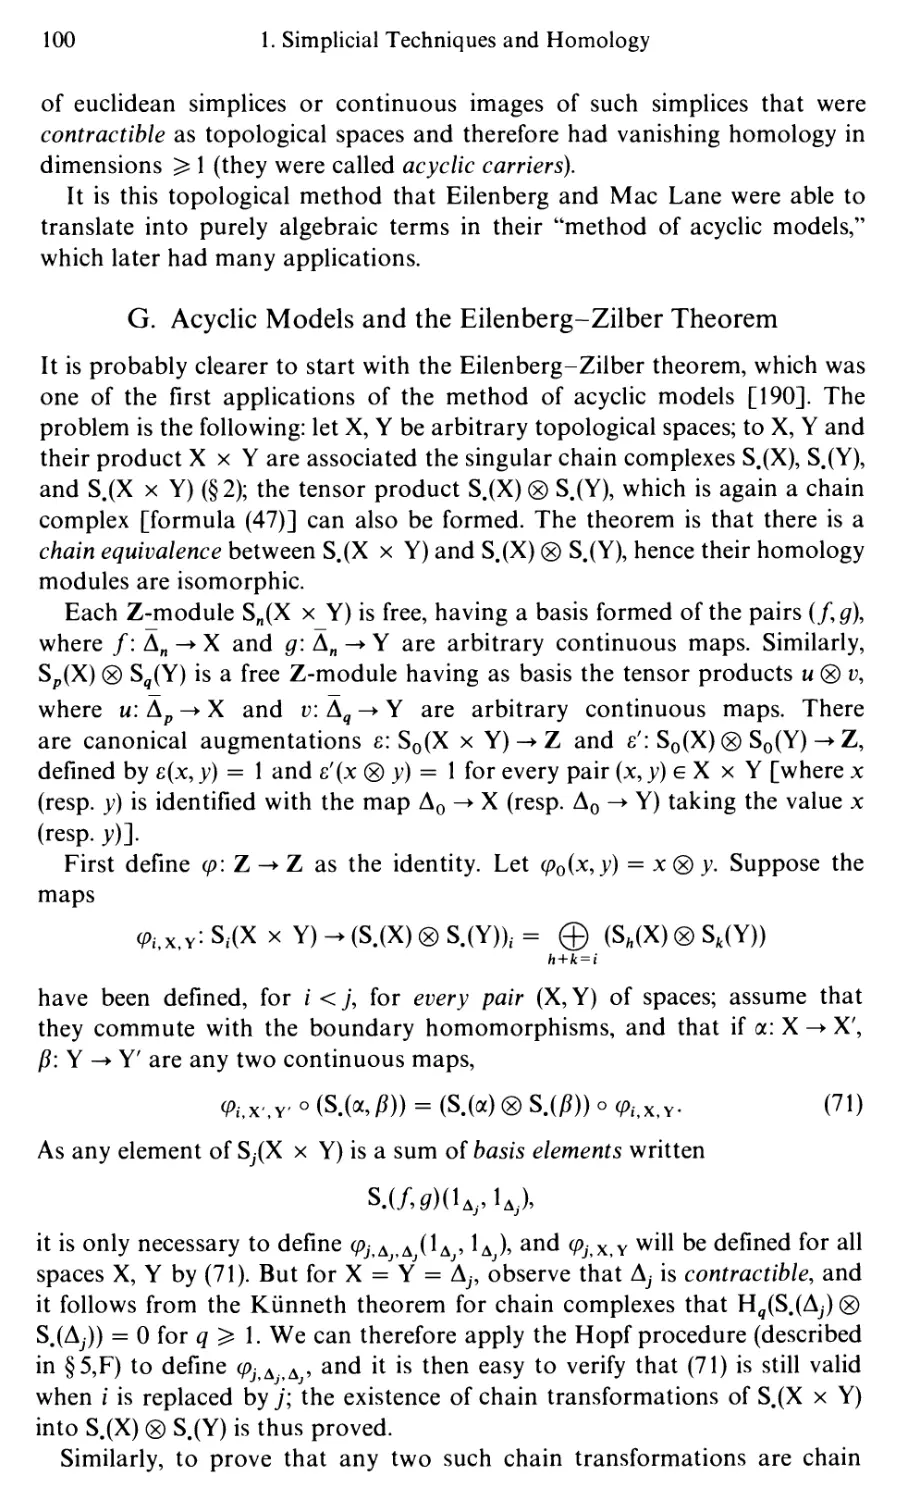 G. Acyclic Models and the Eilenberg-Zilber Theorem